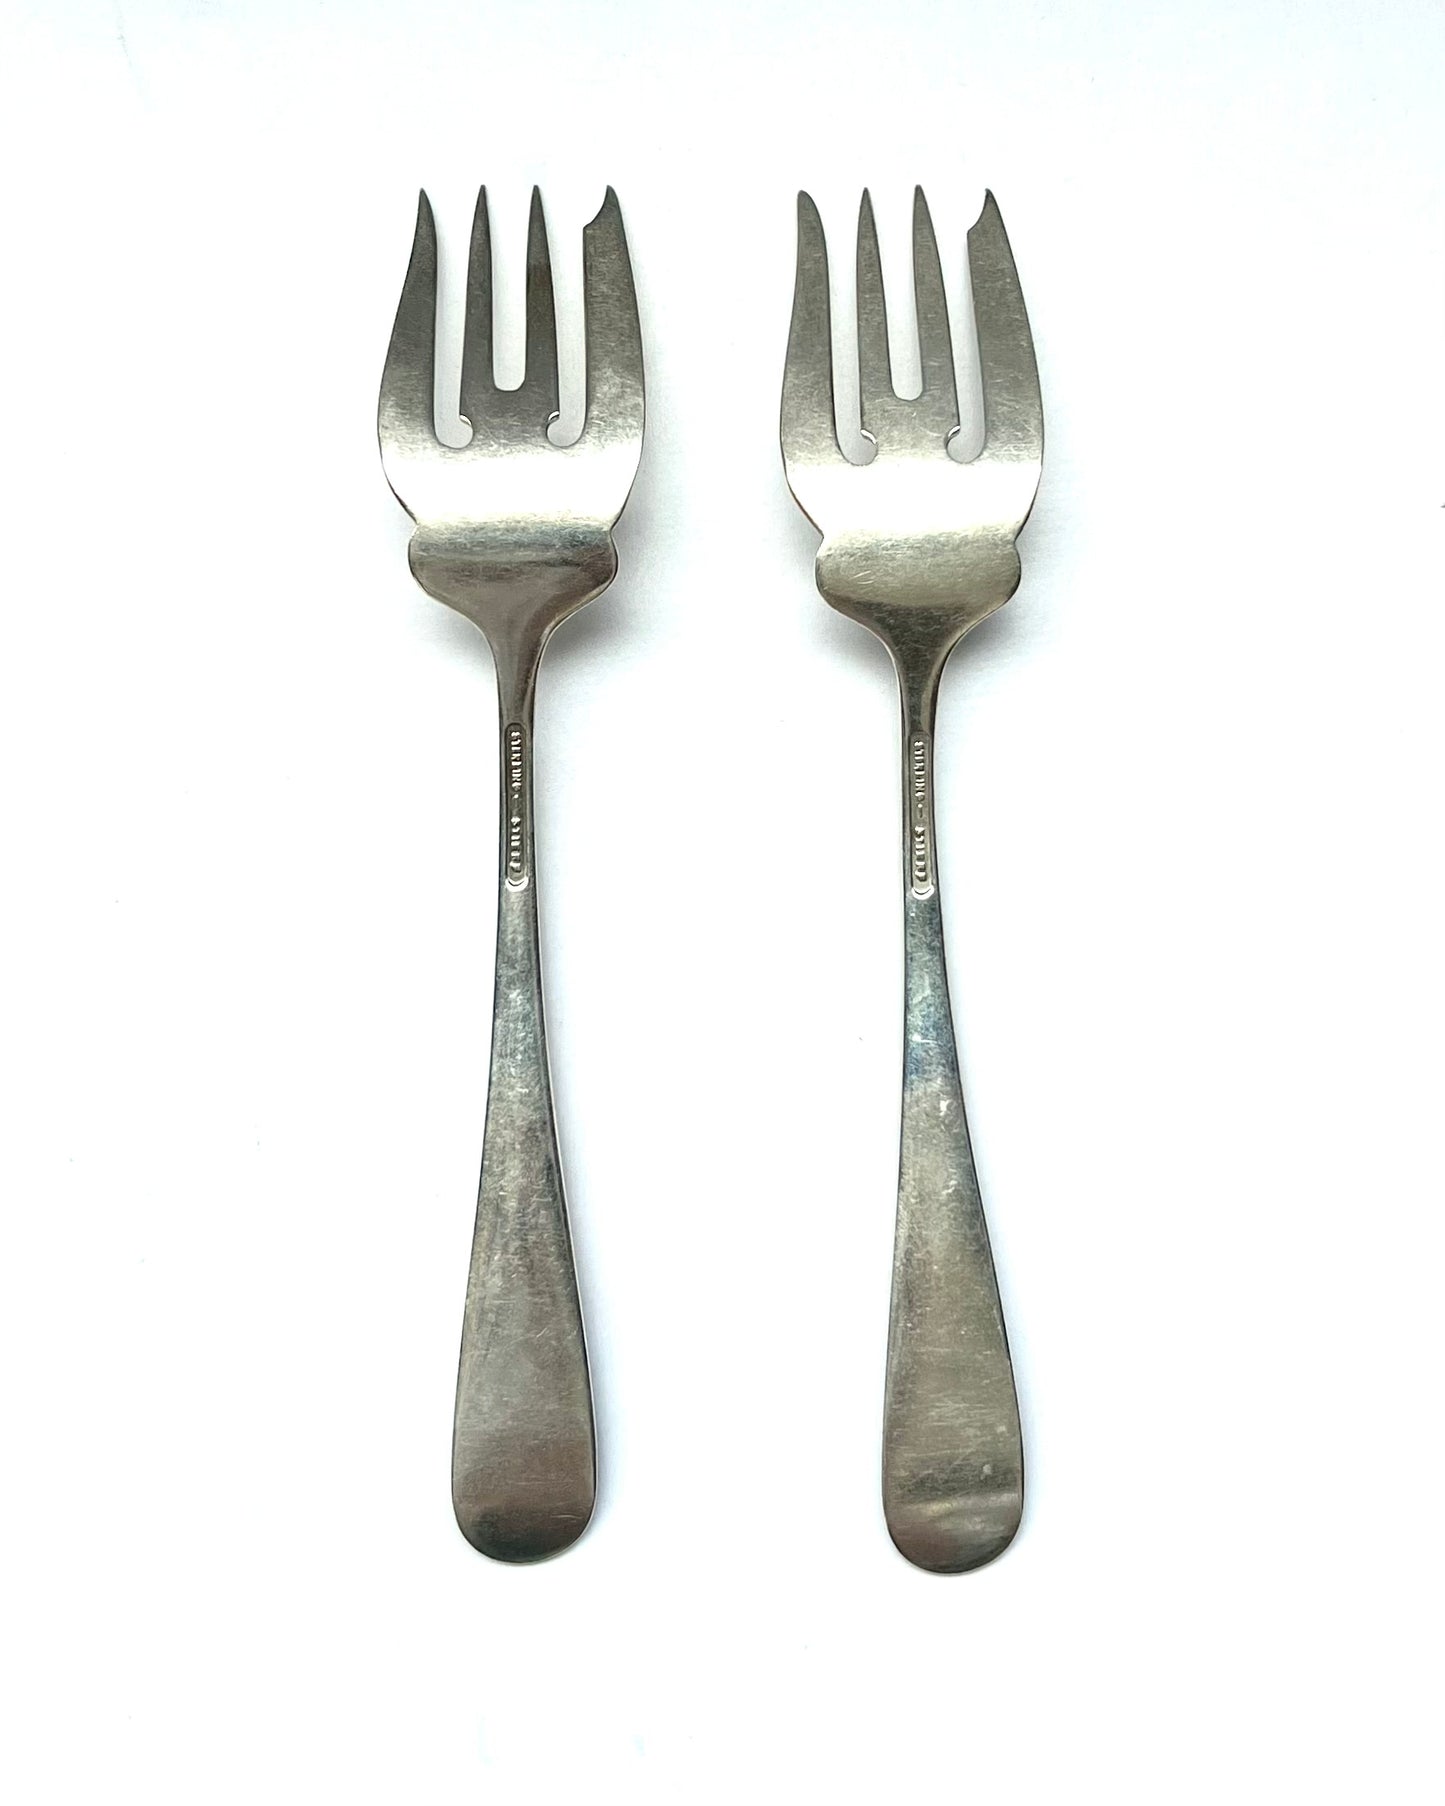 Vintage 1930s American sterling silver Rose Pattern salad fork by Stieff of Baltimore, Maryland.